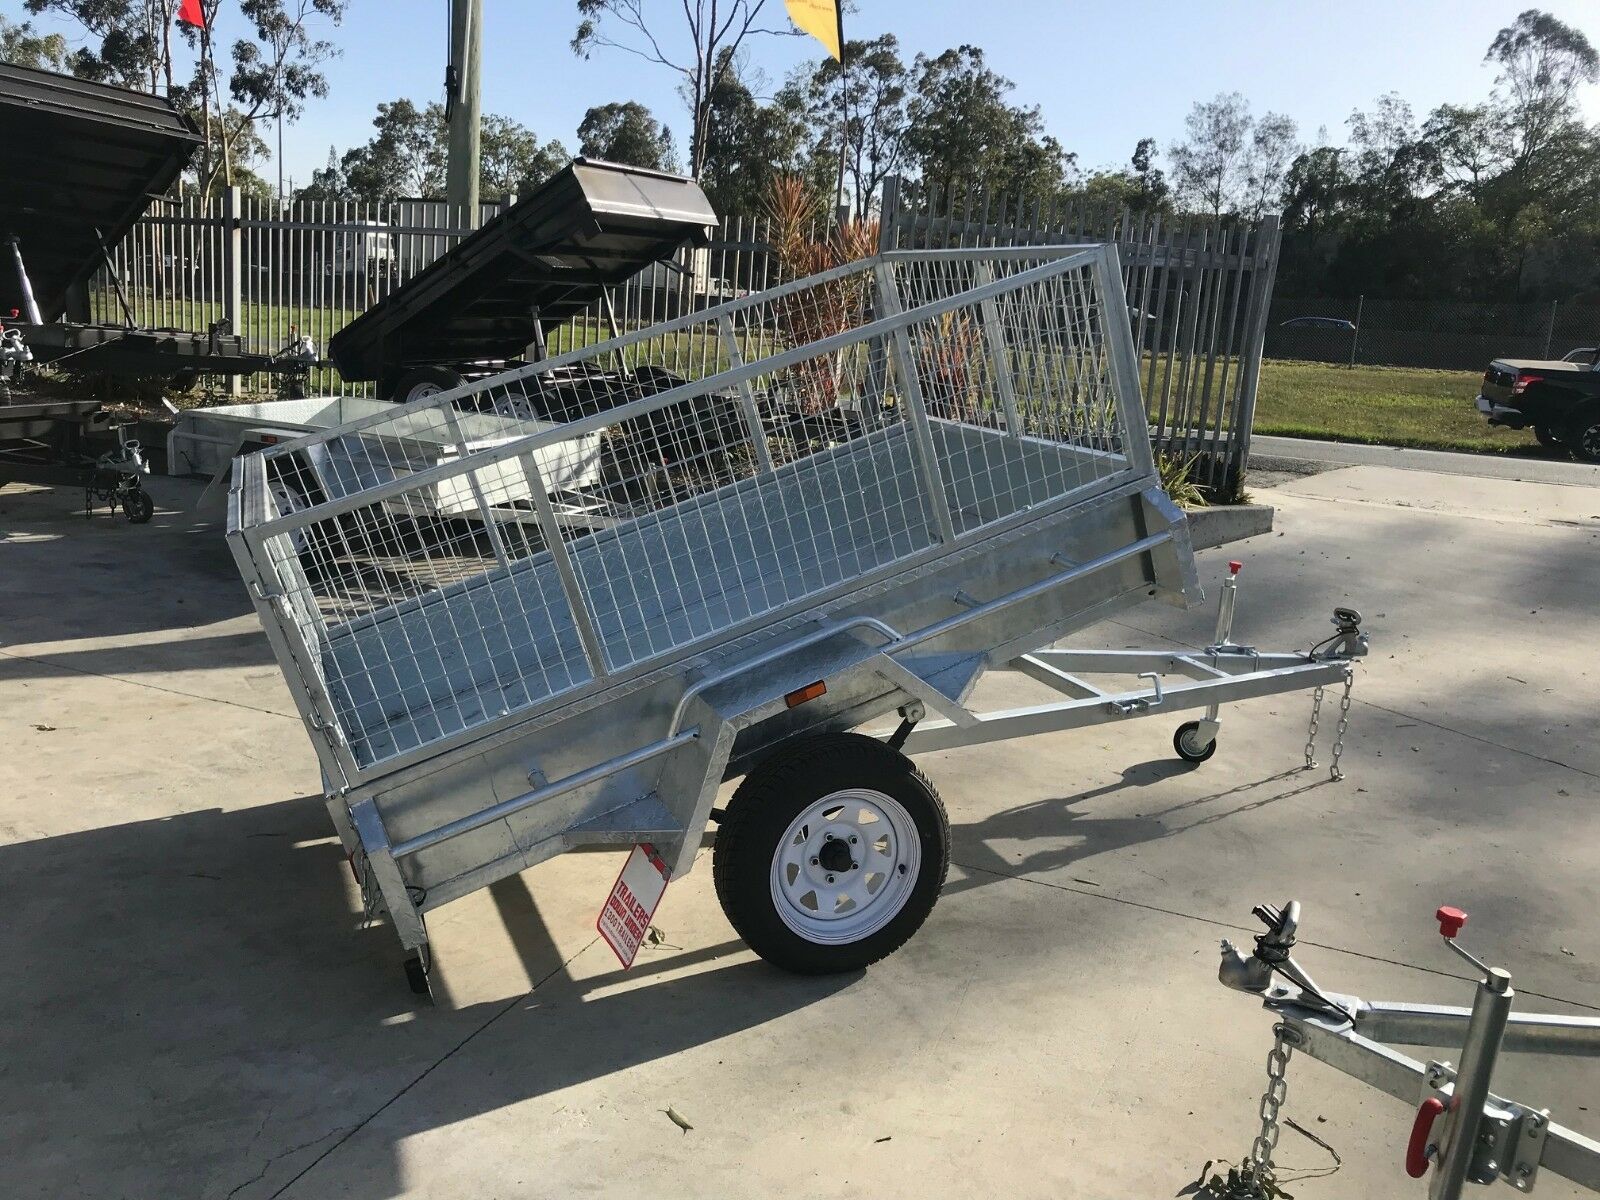 7×5 Heavy Duty Single Axle Galvanised Box Trailer with 2 Ft Cage for Sale in Brisbane<br><br><span class="galv-import">Imported Trailer</span>